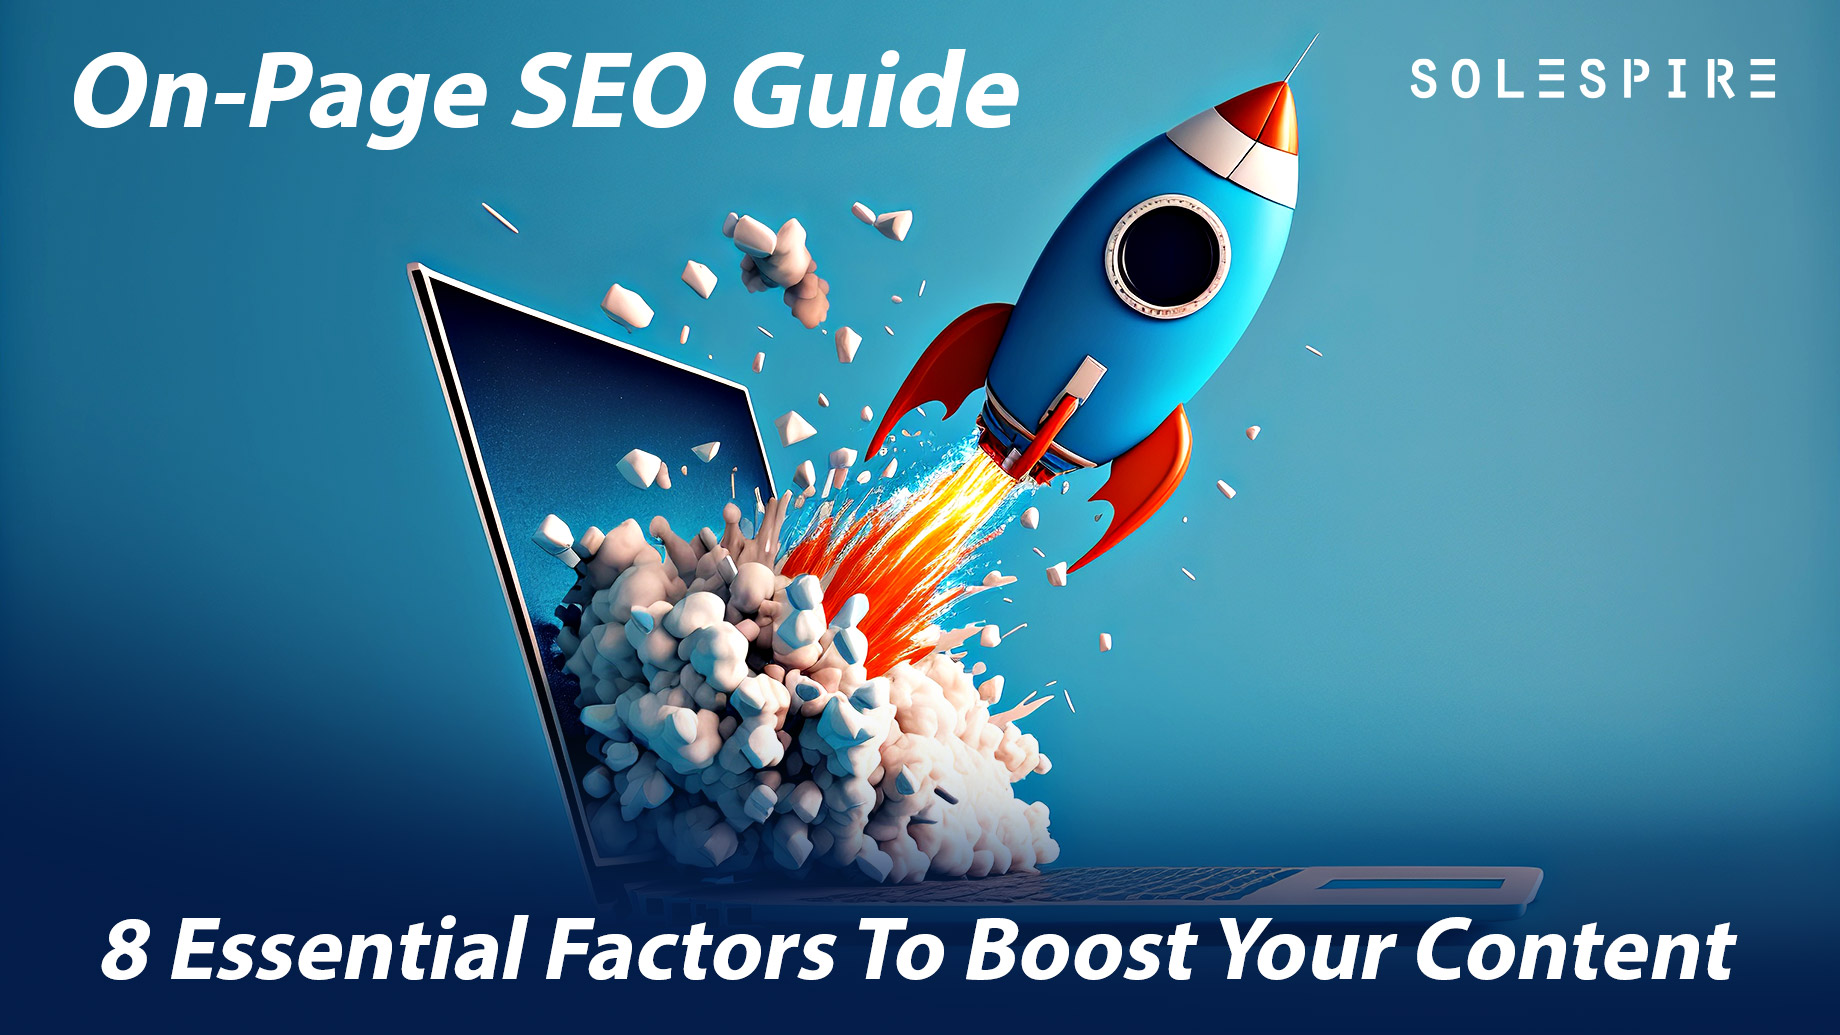 On-Page SEO Guide: 8 Essential Factors To Boost Your Content